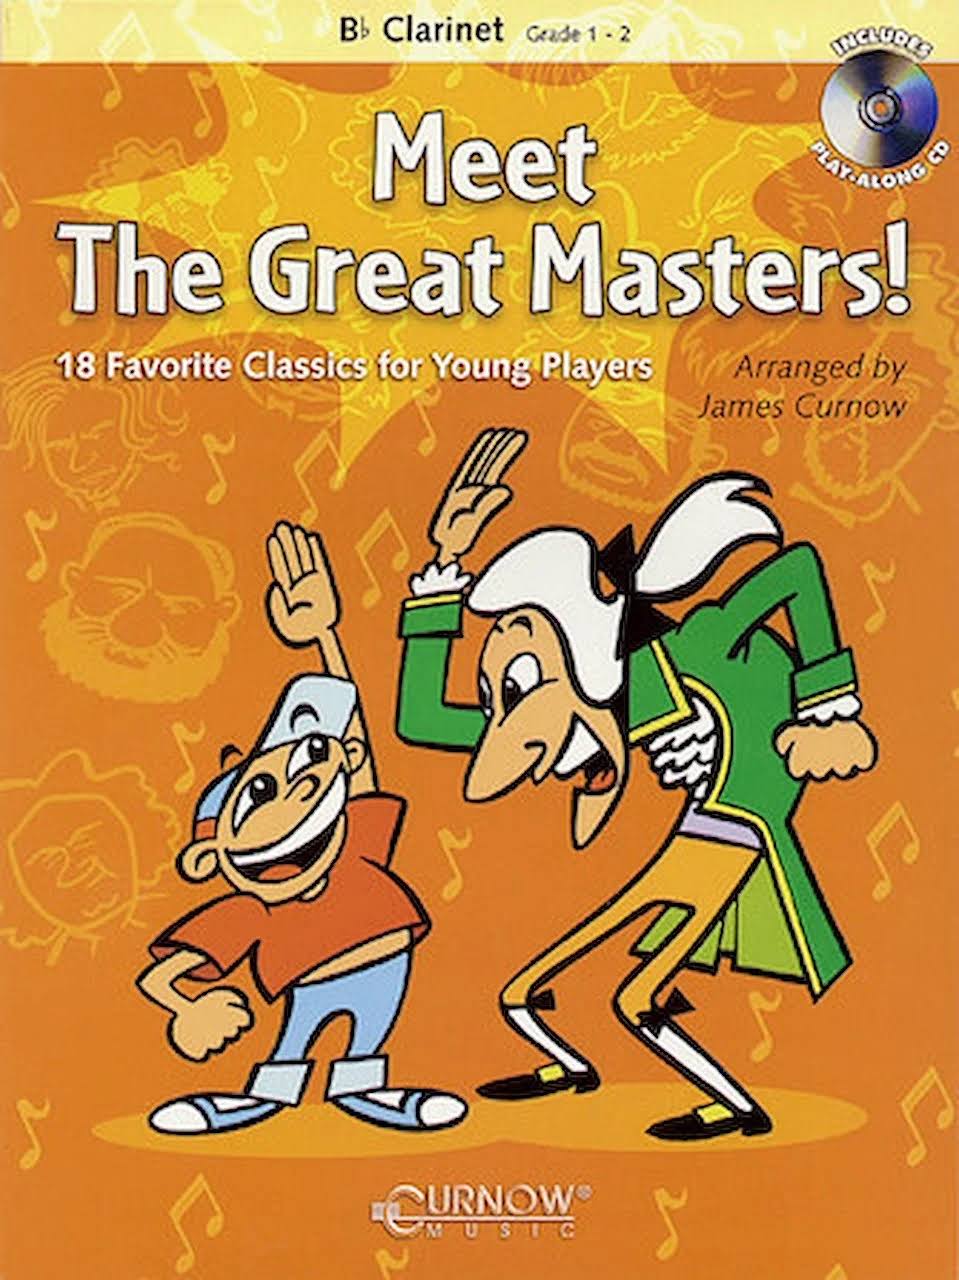 Meet The Great Masters, 18 Favorite Classics For Young PLAYERS